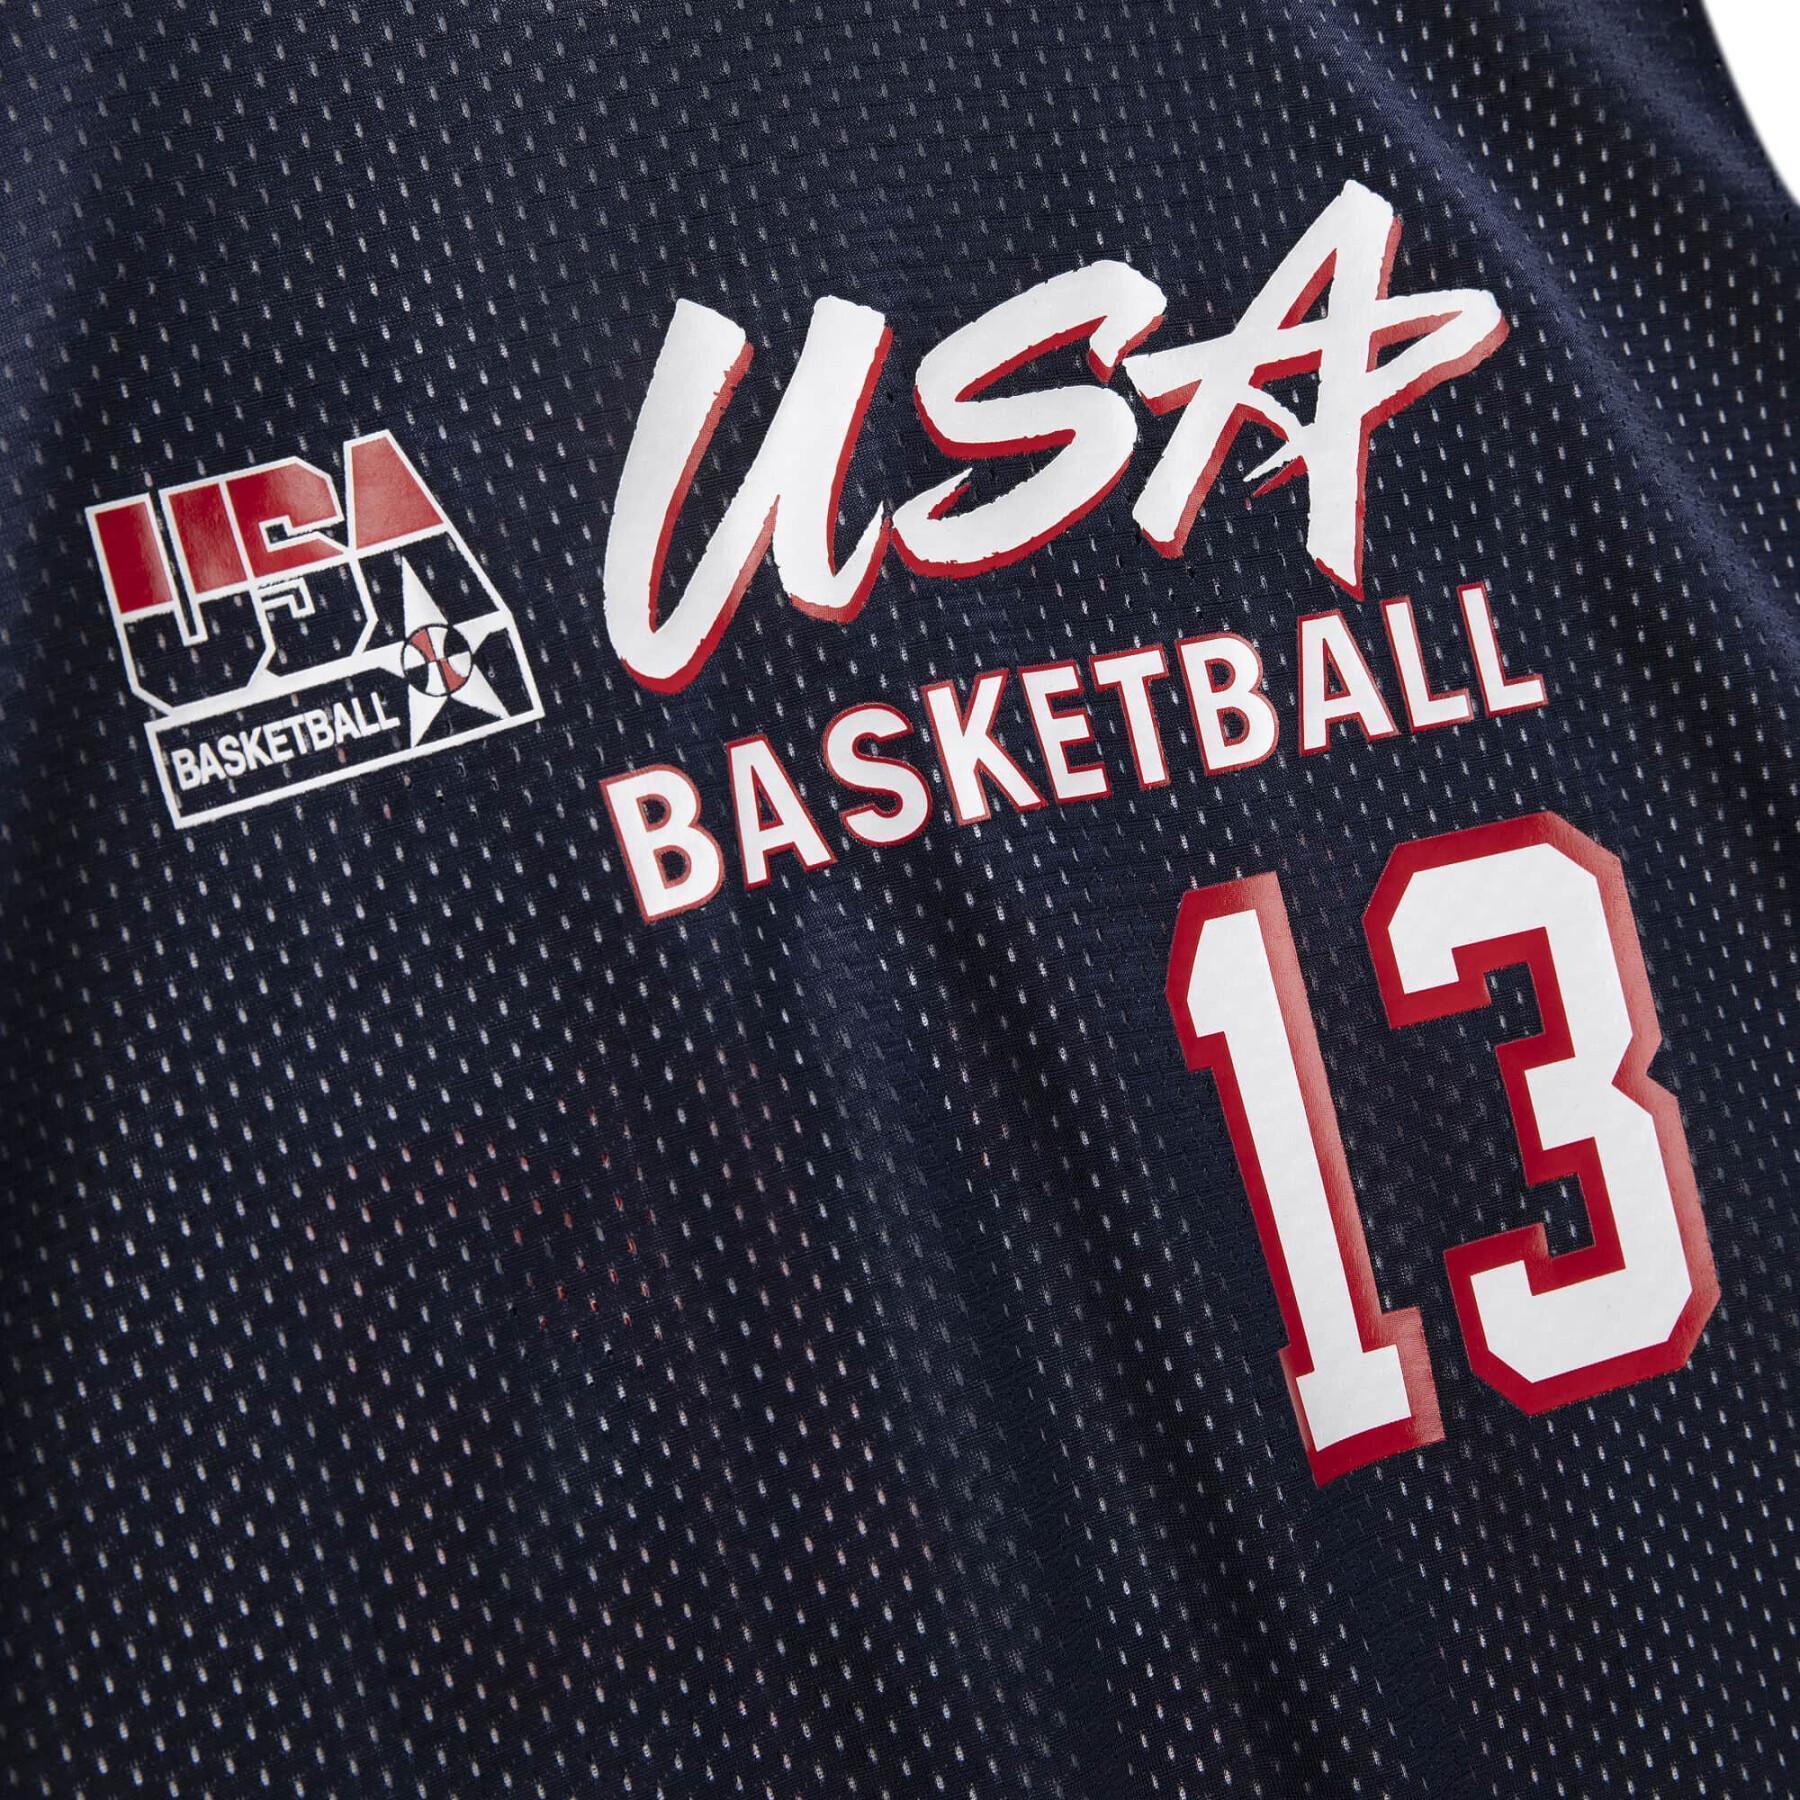 Maillot USA authentic